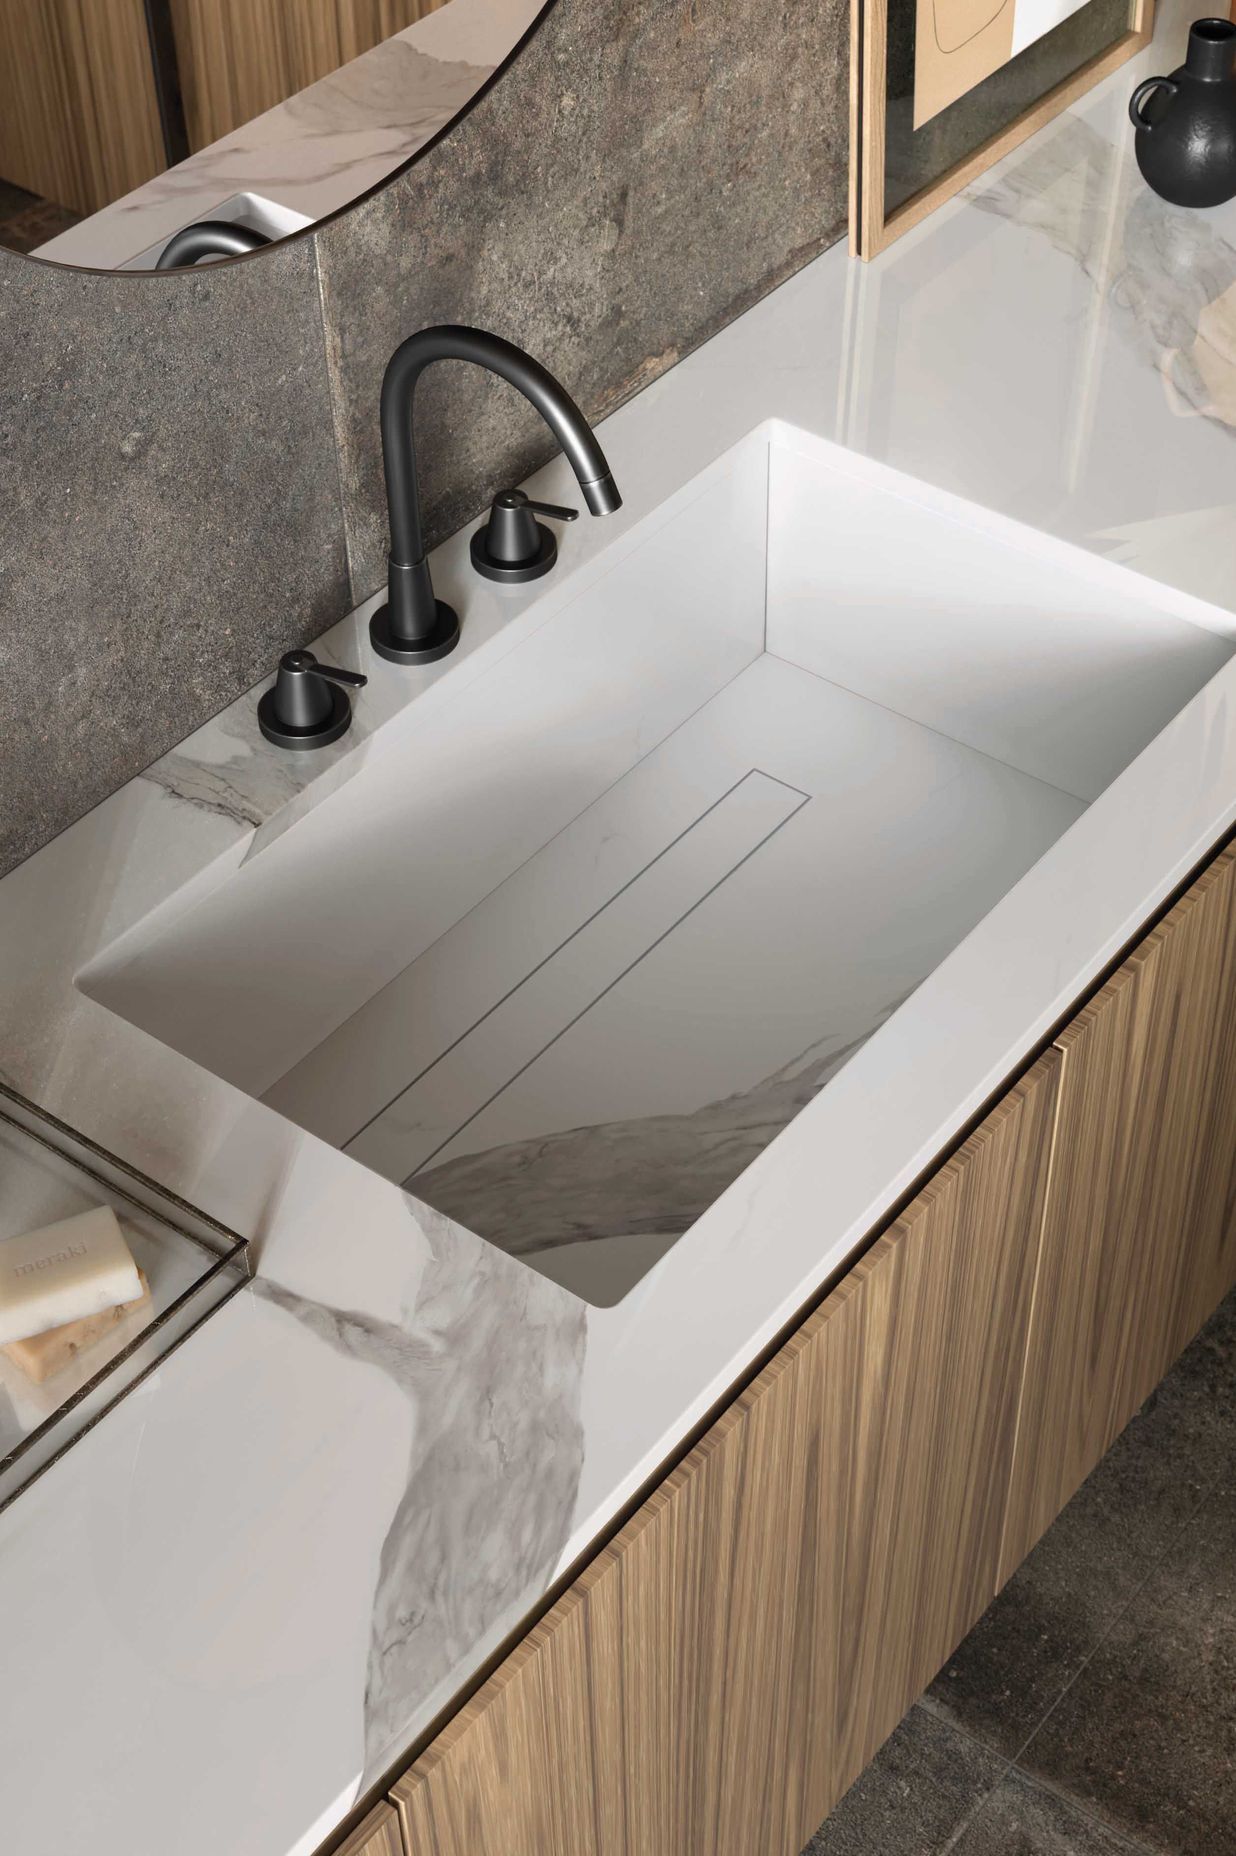 Porcelain can be used to create a seamless bathroom design.